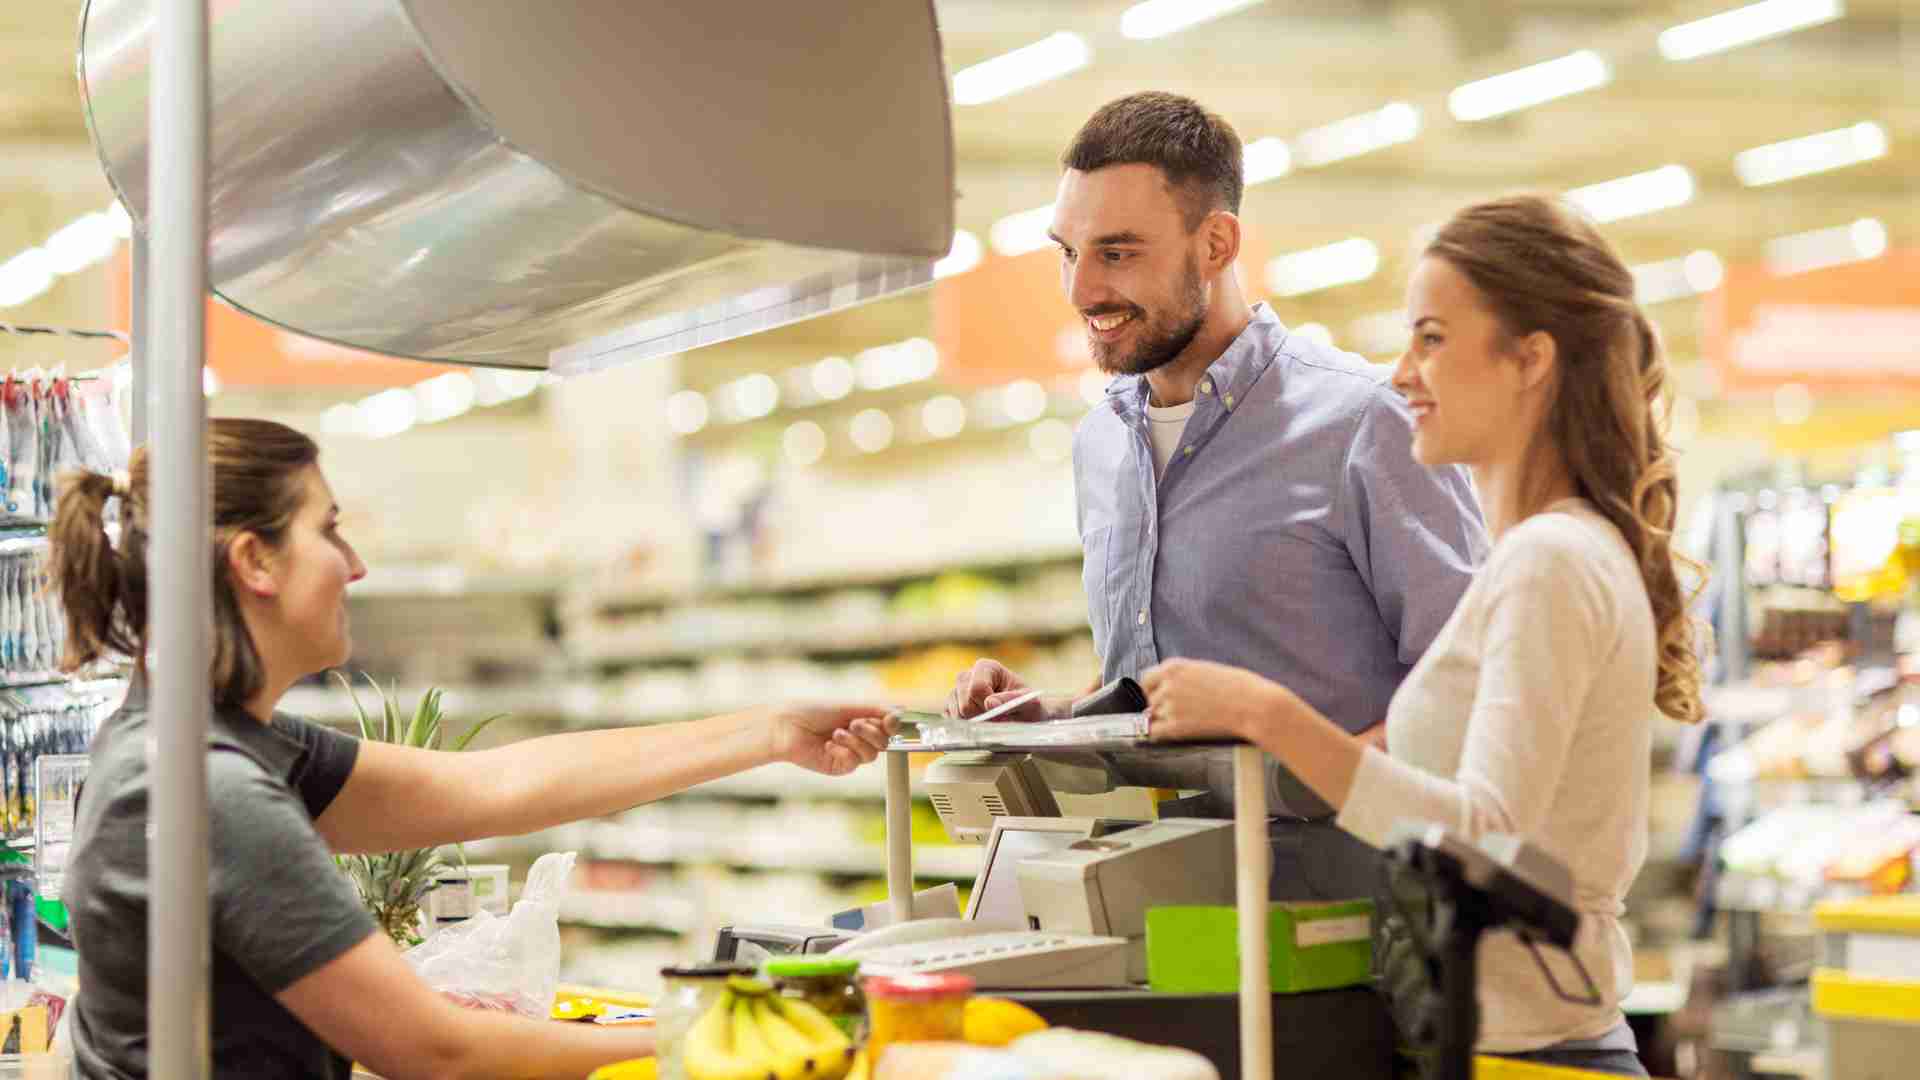 Use your SNAP card to pay at the checkout, Food Stamps allow you to save money